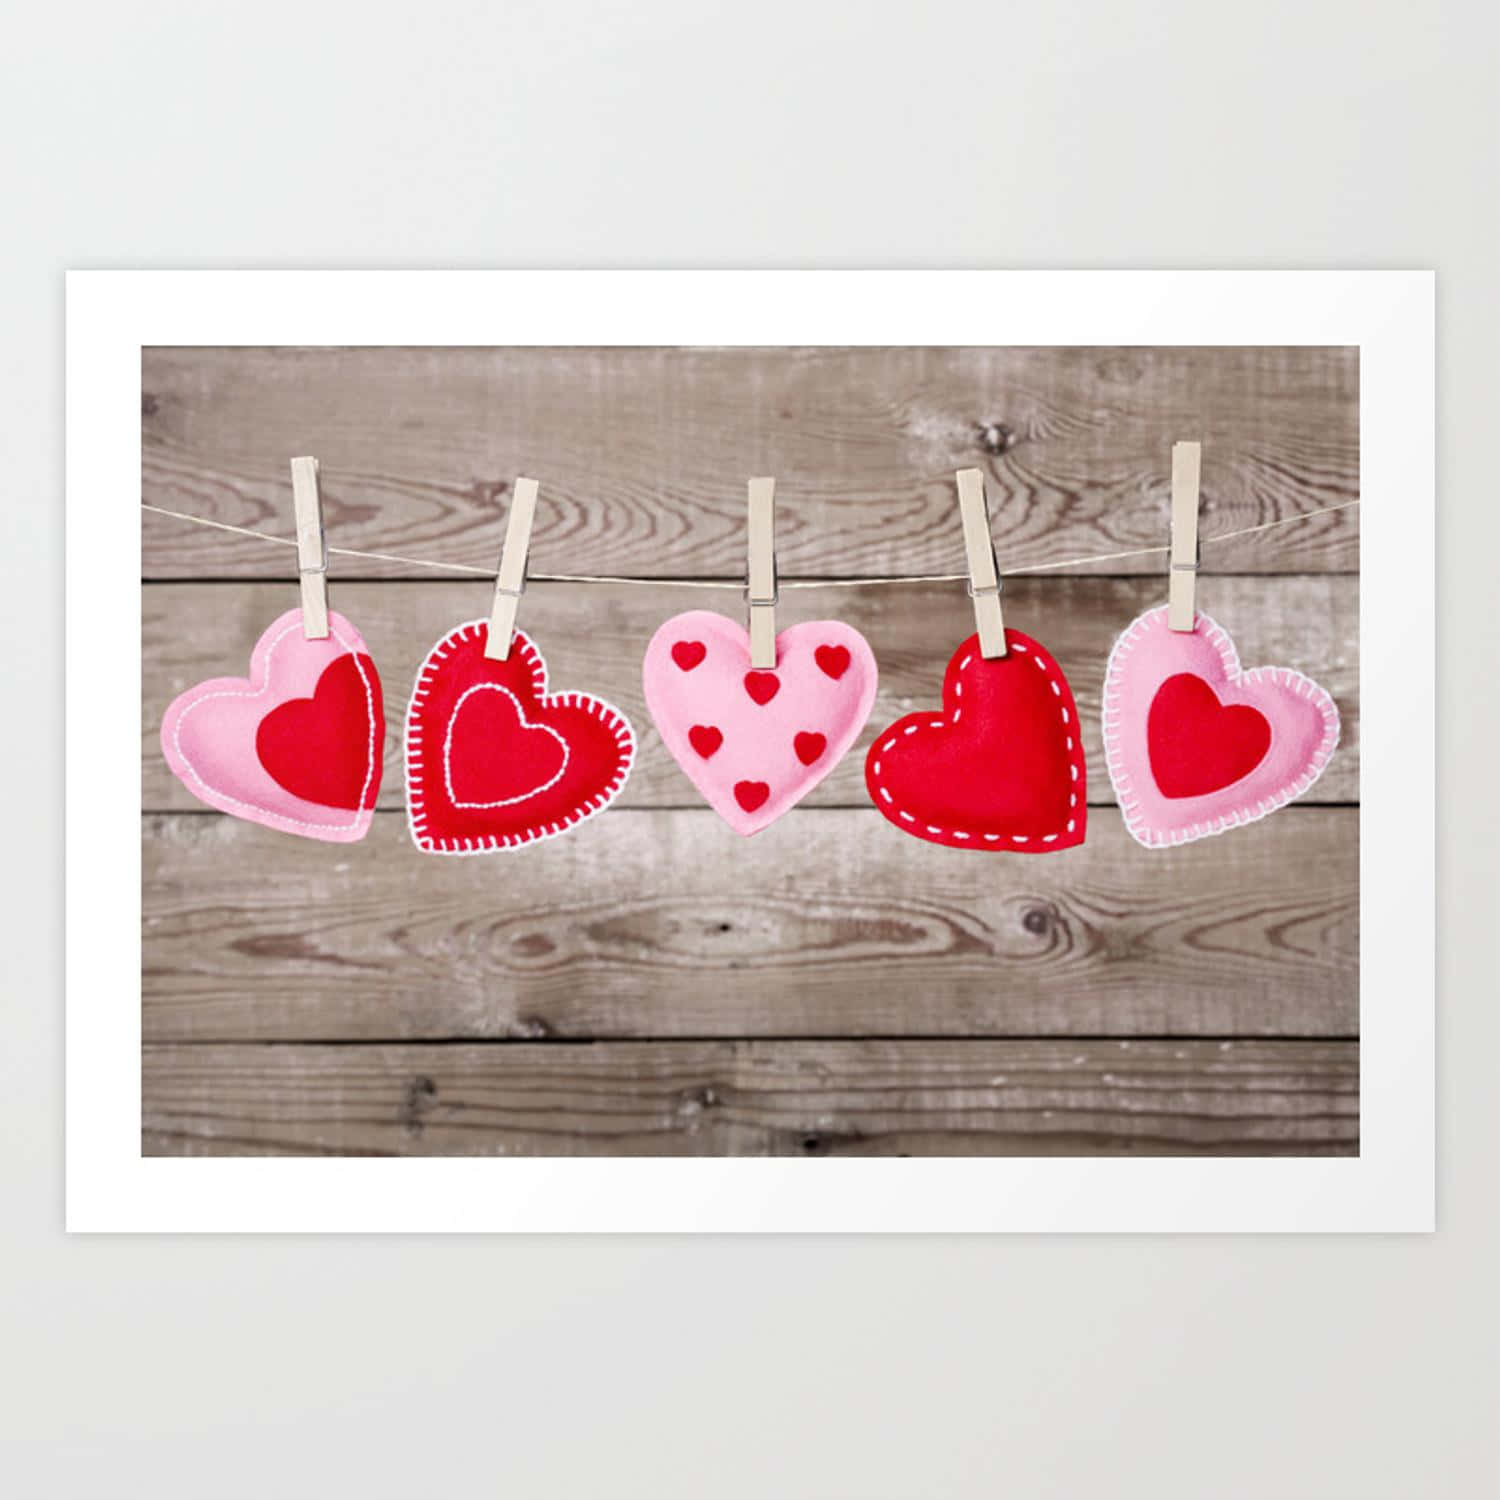 Celebrate your Rustic Valentine Day with an open-air picnic or romantic stroll Wallpaper